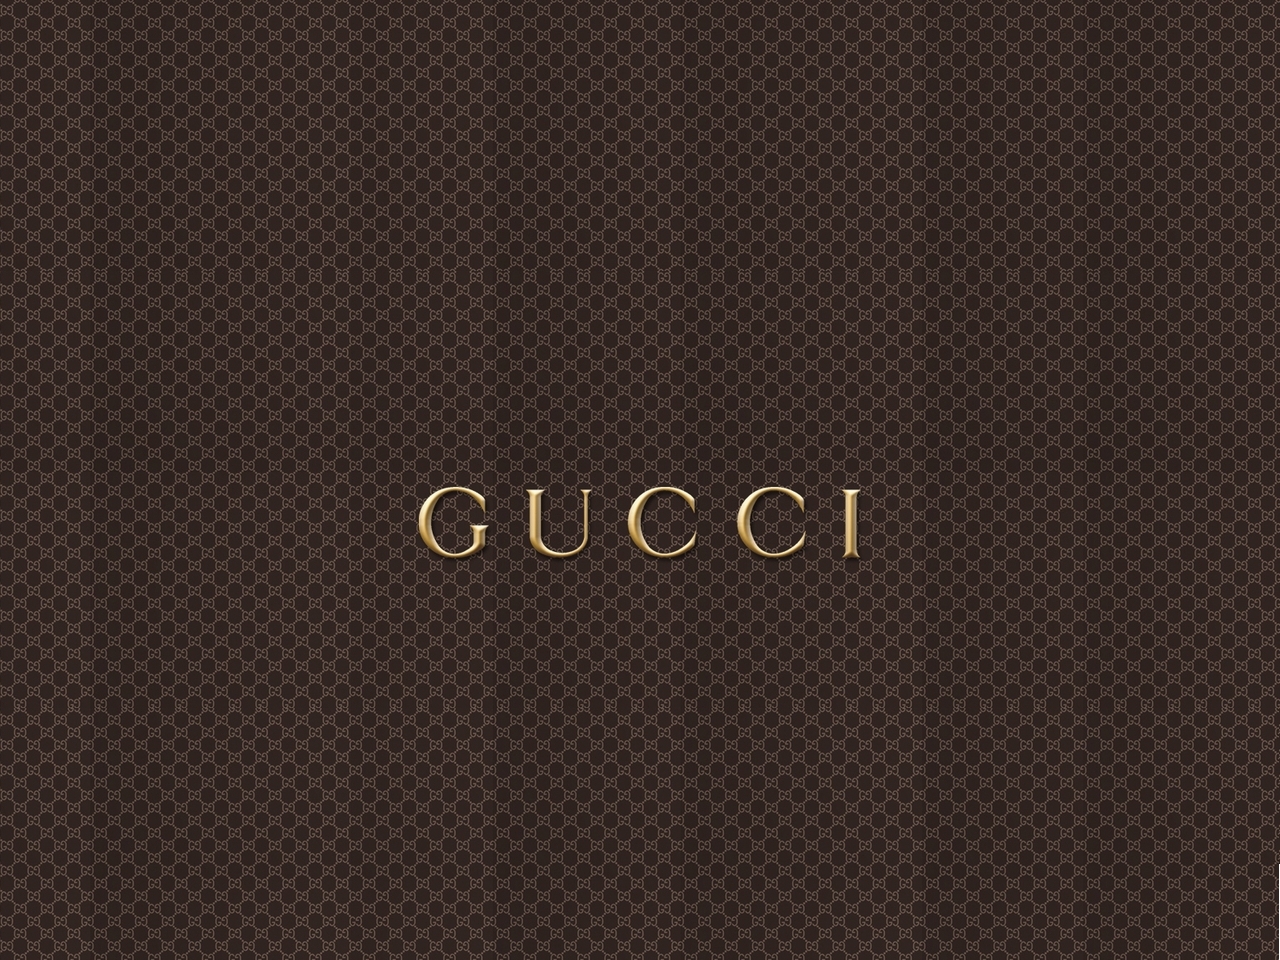 Free Download Pin Gucci Android Wallpaper 1280x960 For Your Desktop Mobile Tablet Explore 50 Gucci Wallpapers For Phones Free Wallpapers For Cell Phones Funny Wallpapers For Phones Cute Wallpaper For Phone